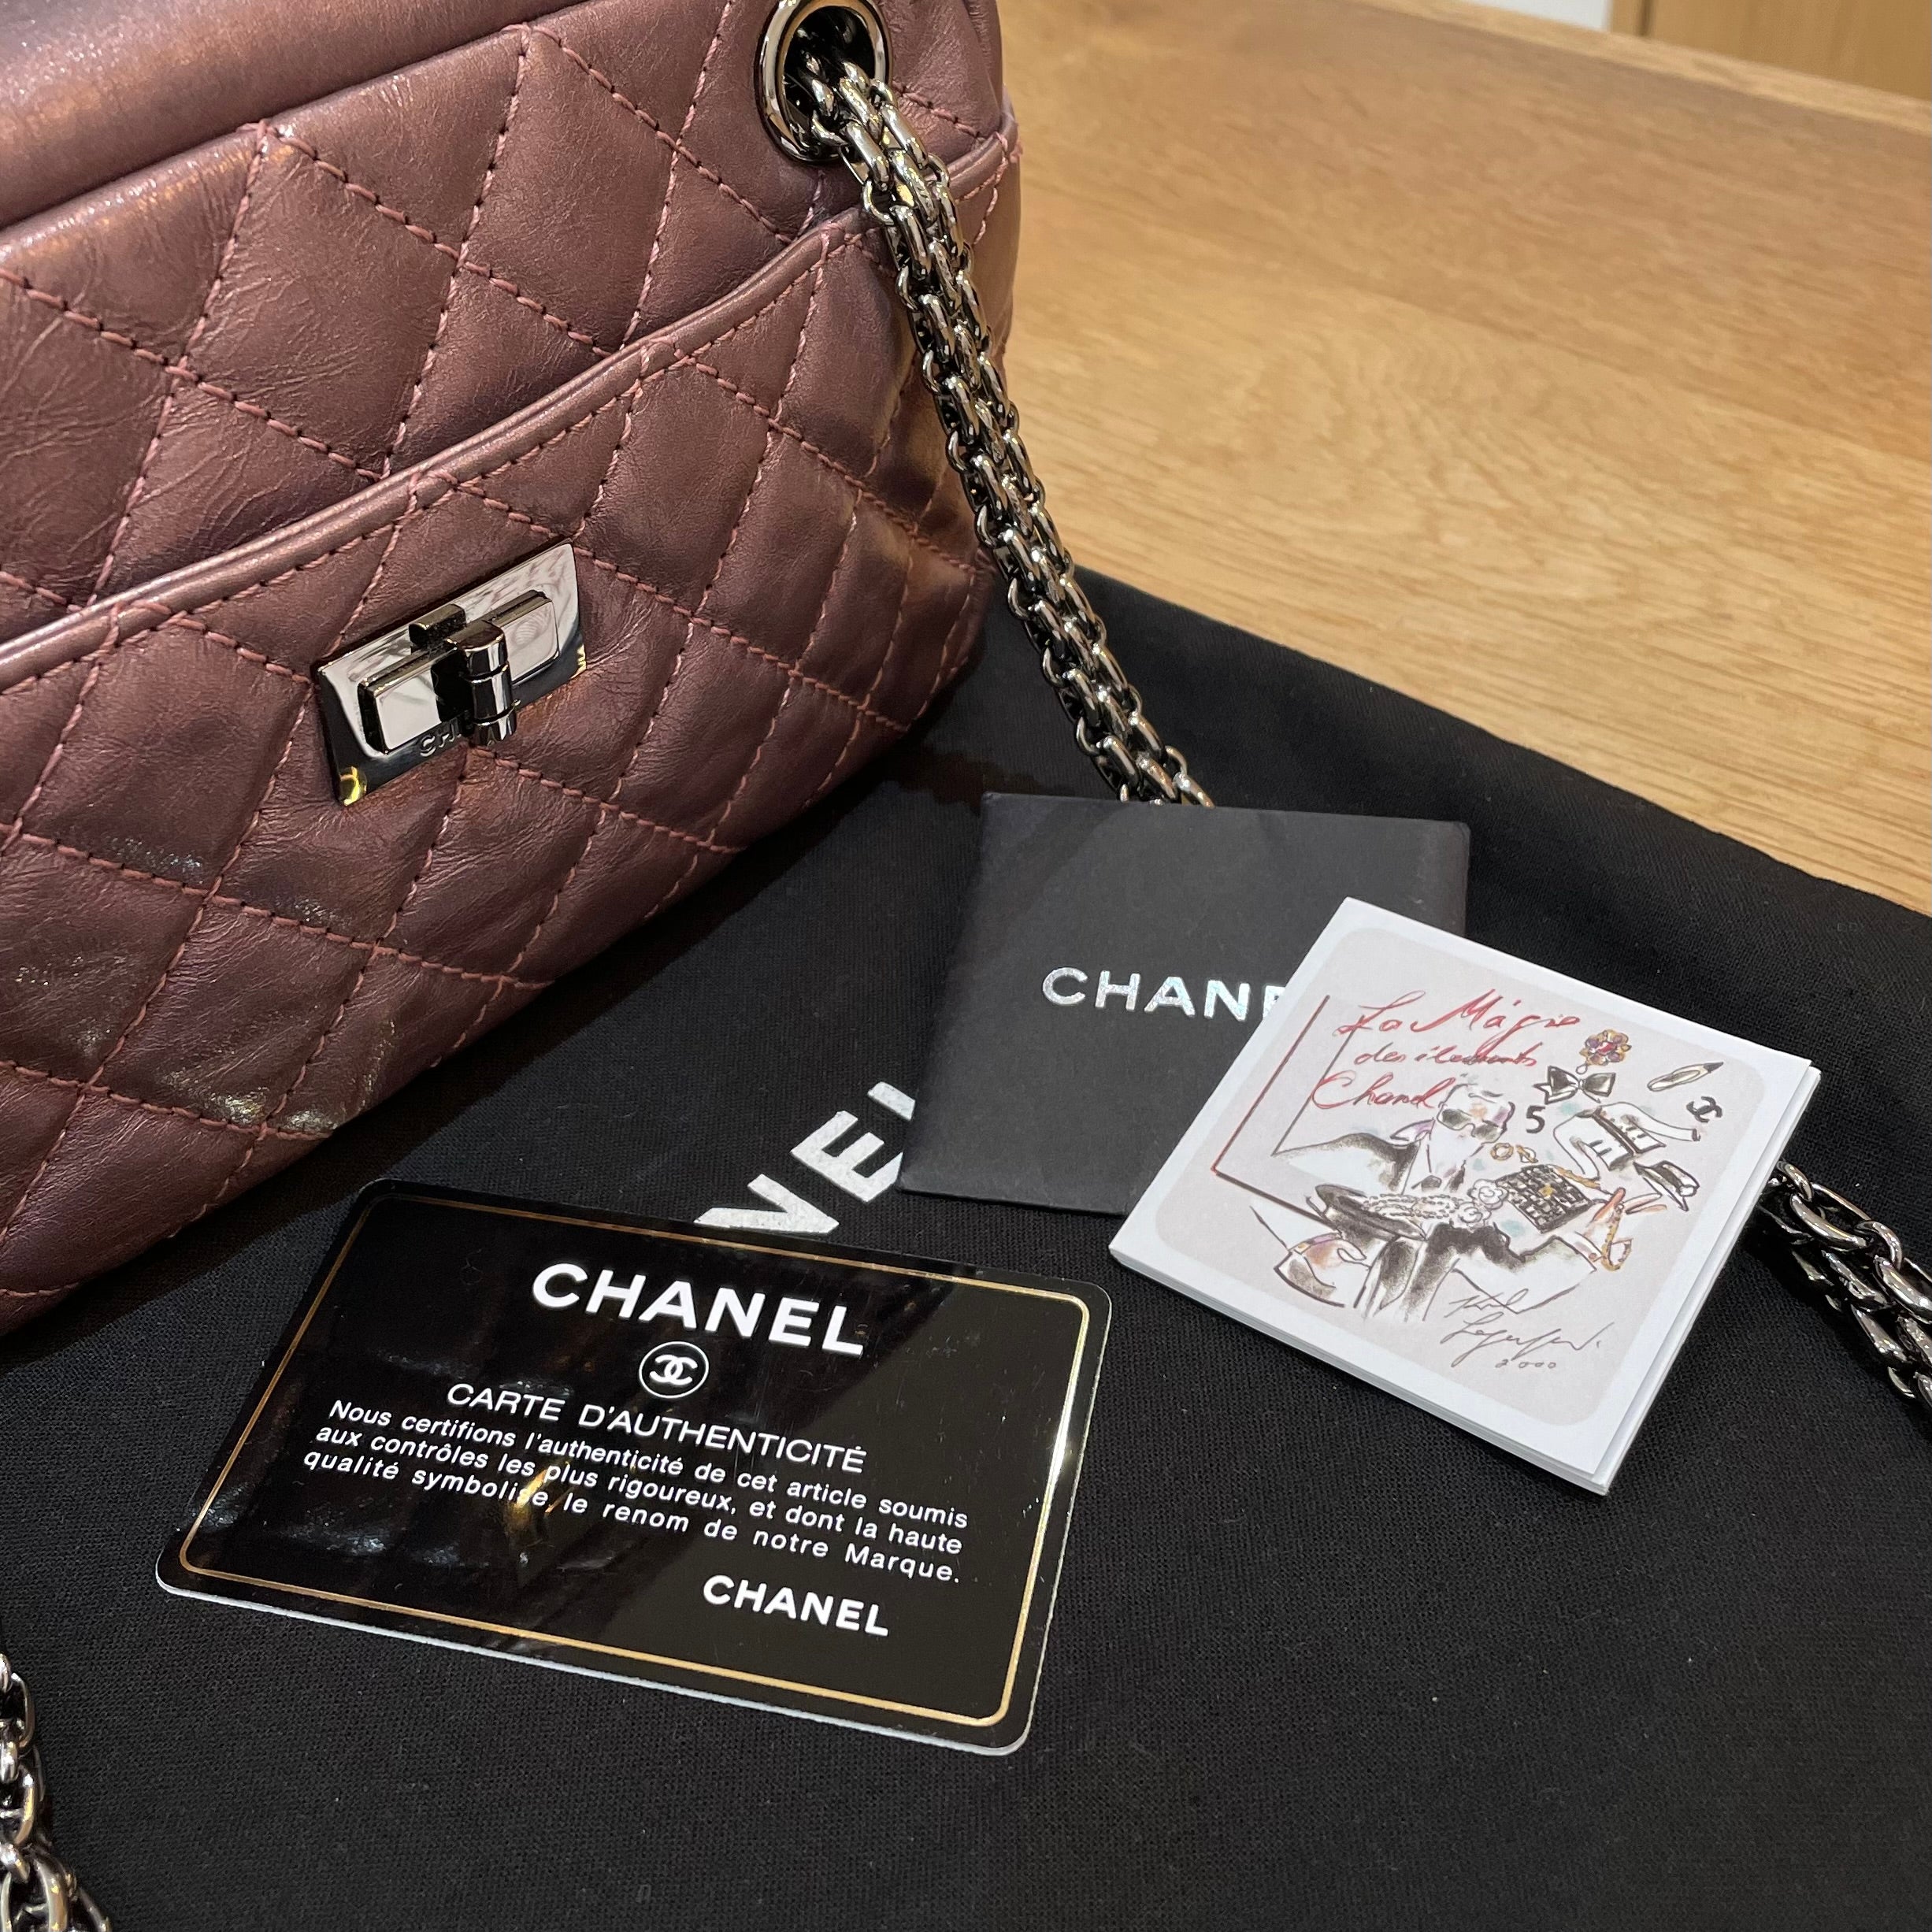 Chanel Reissue Camera Review 